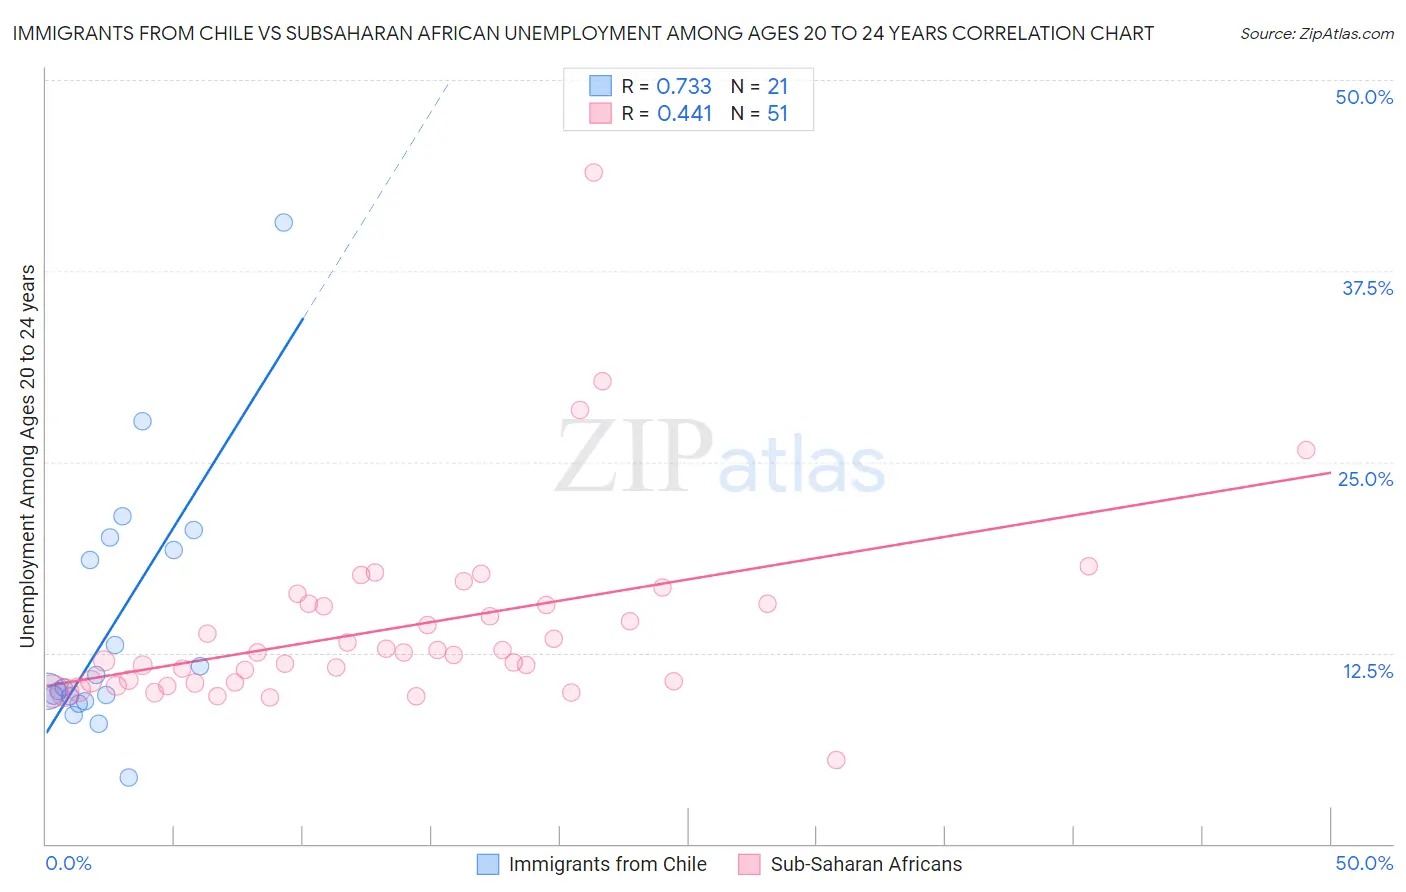 Immigrants from Chile vs Subsaharan African Unemployment Among Ages 20 to 24 years